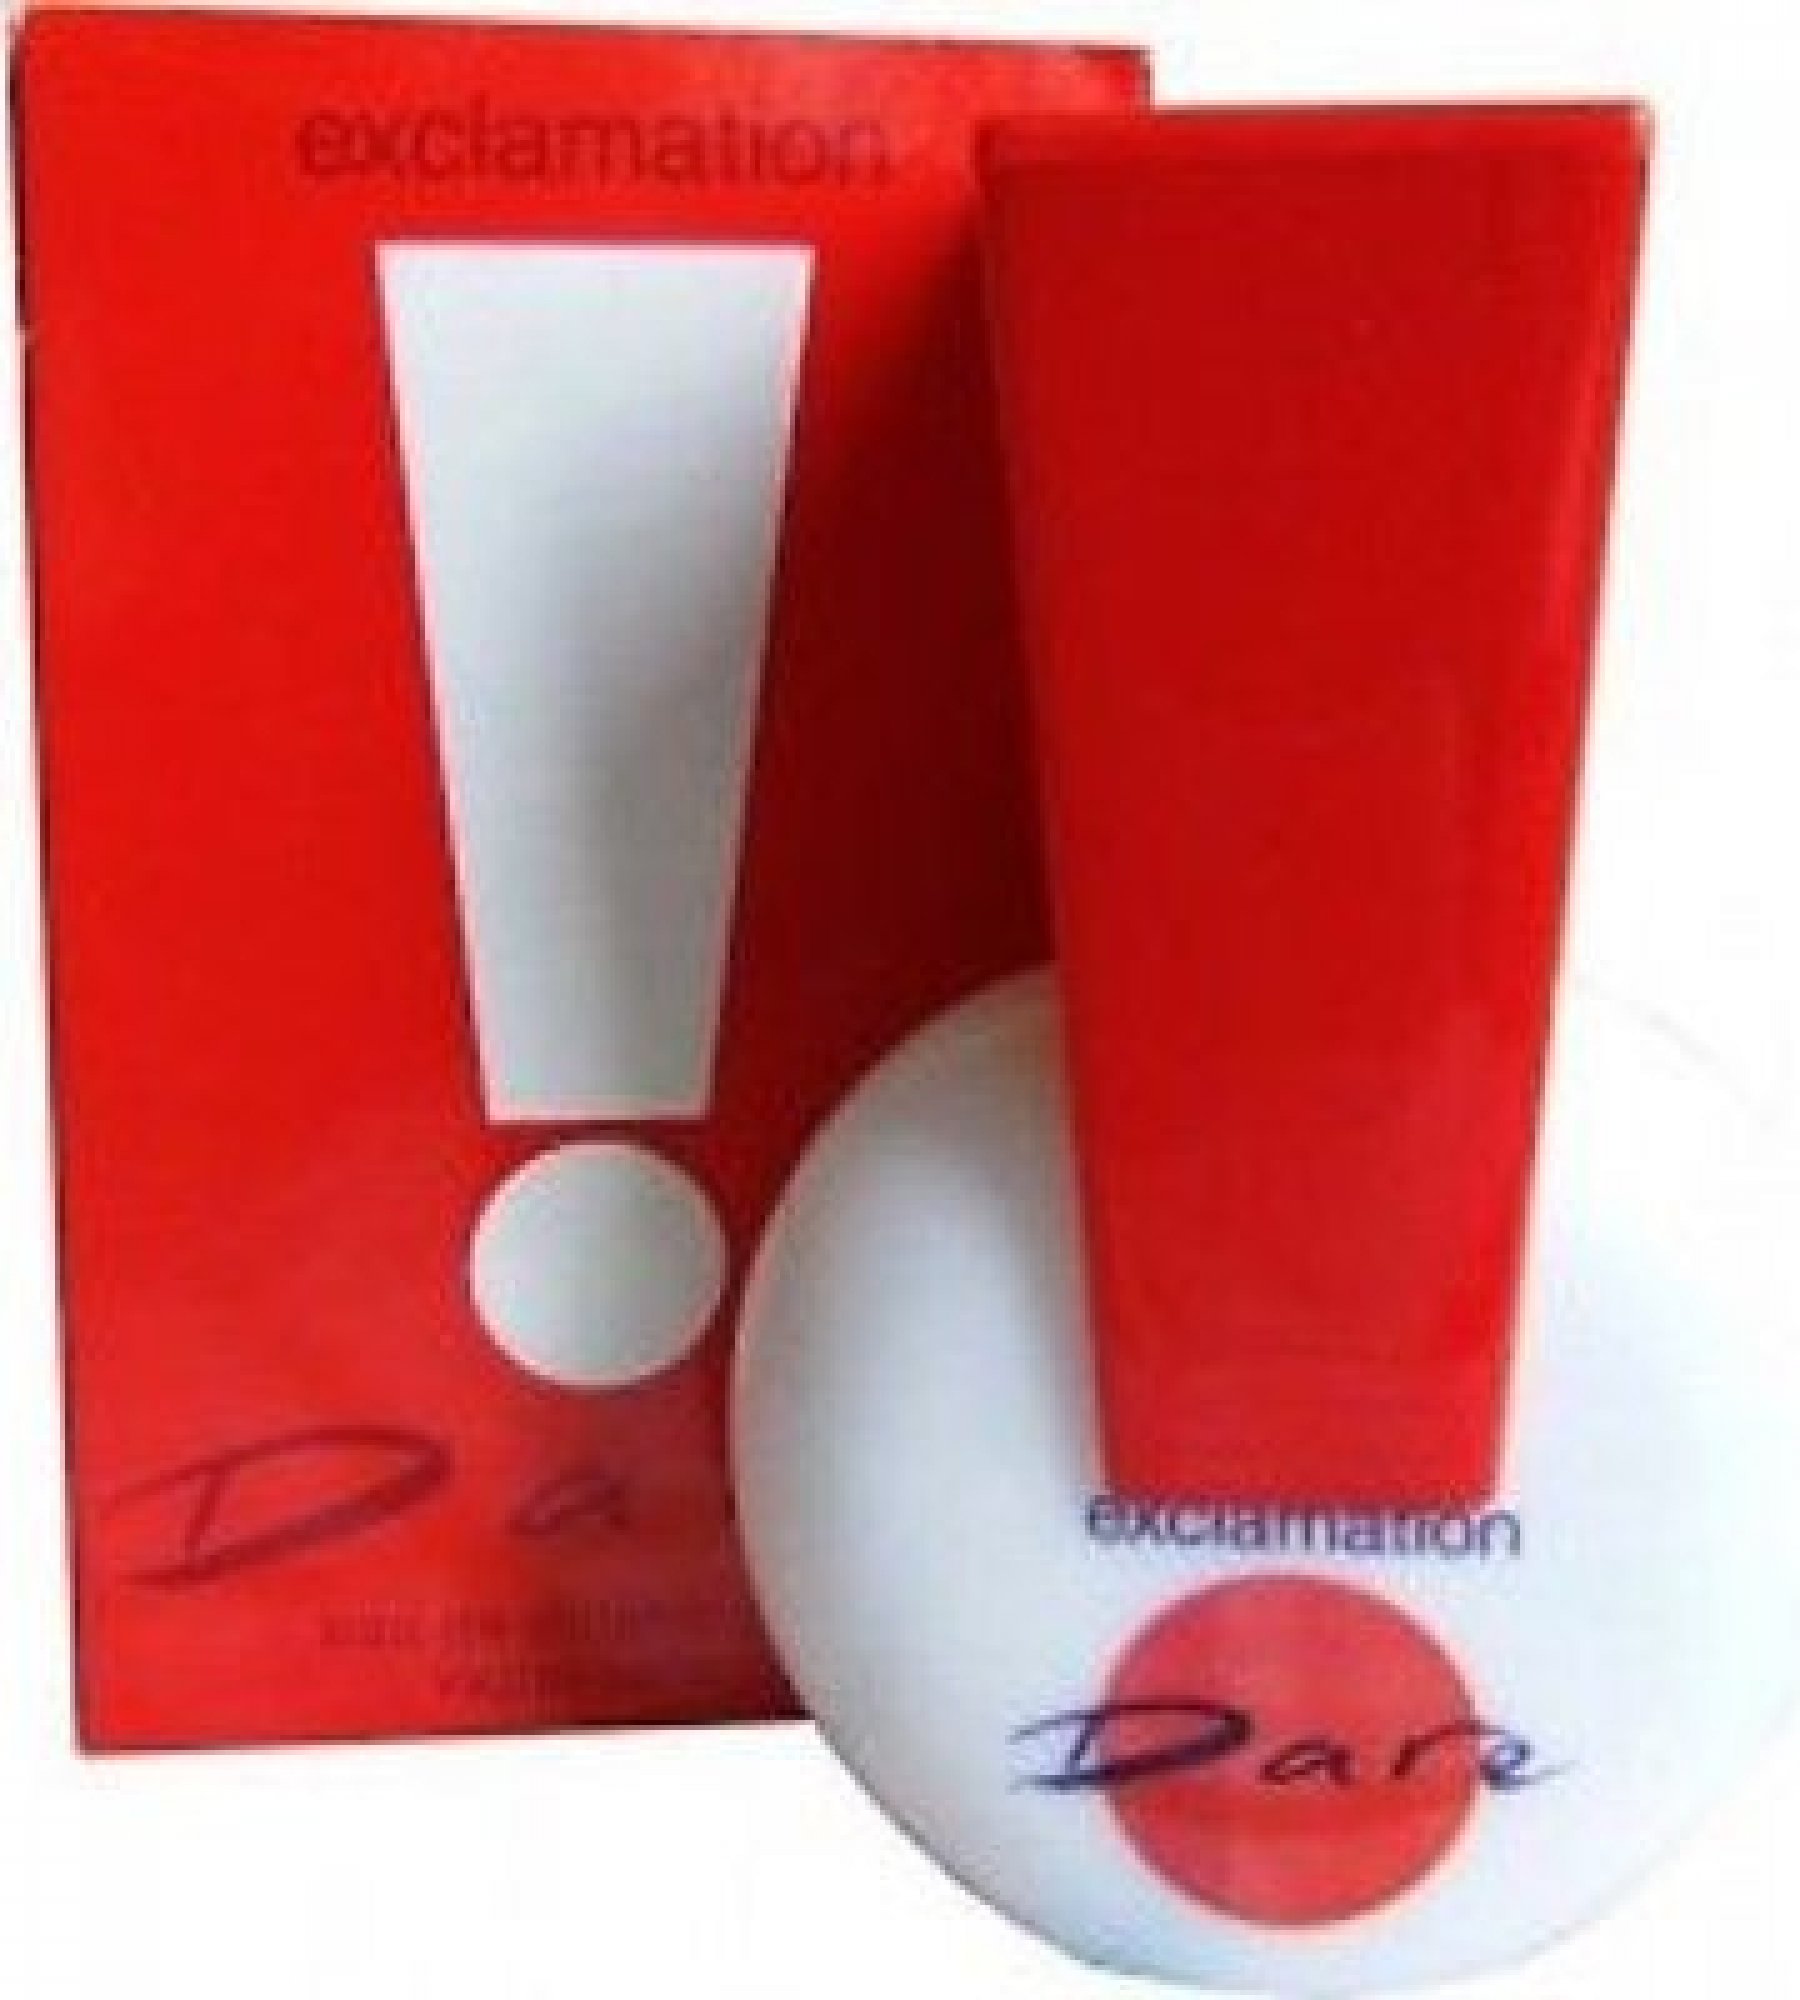 Exclamation Dare, edt 15ml